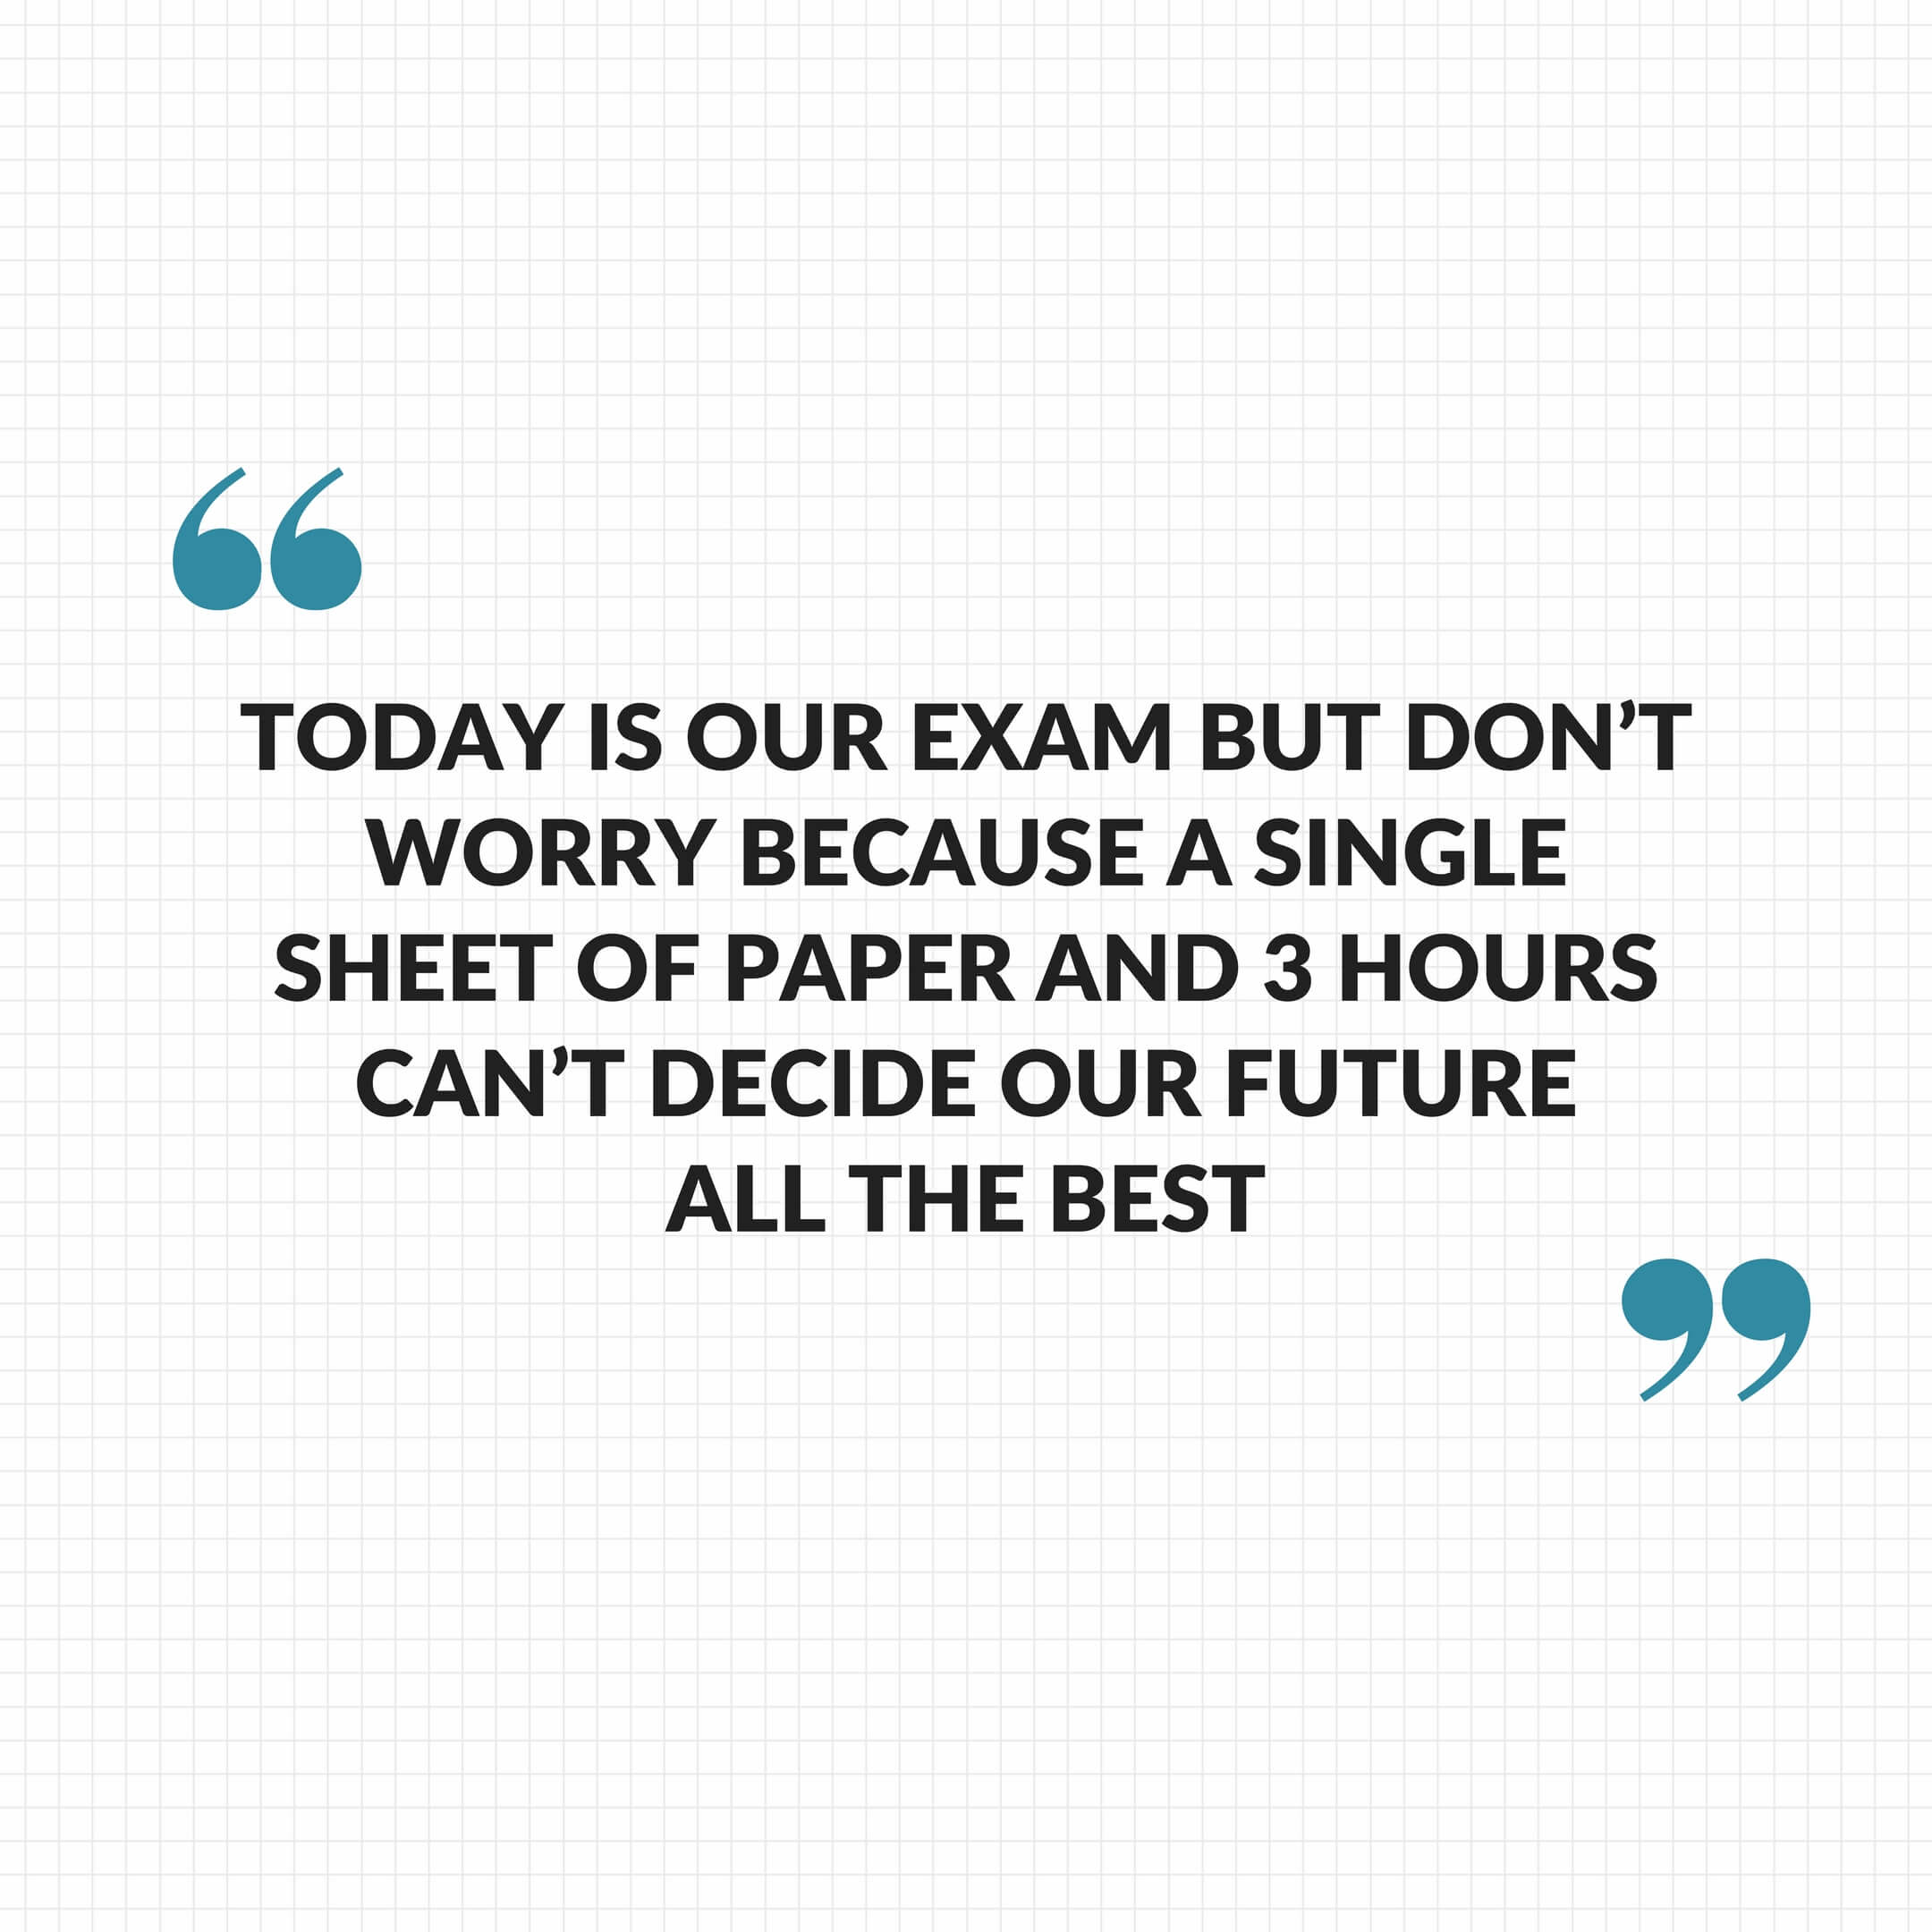 Today is our exam but don't worry because single sheet of paper and 3 hours can't decide our future Future belongs to those who believe in there beauty of dreams All the best! - Best Of Luck Quotes